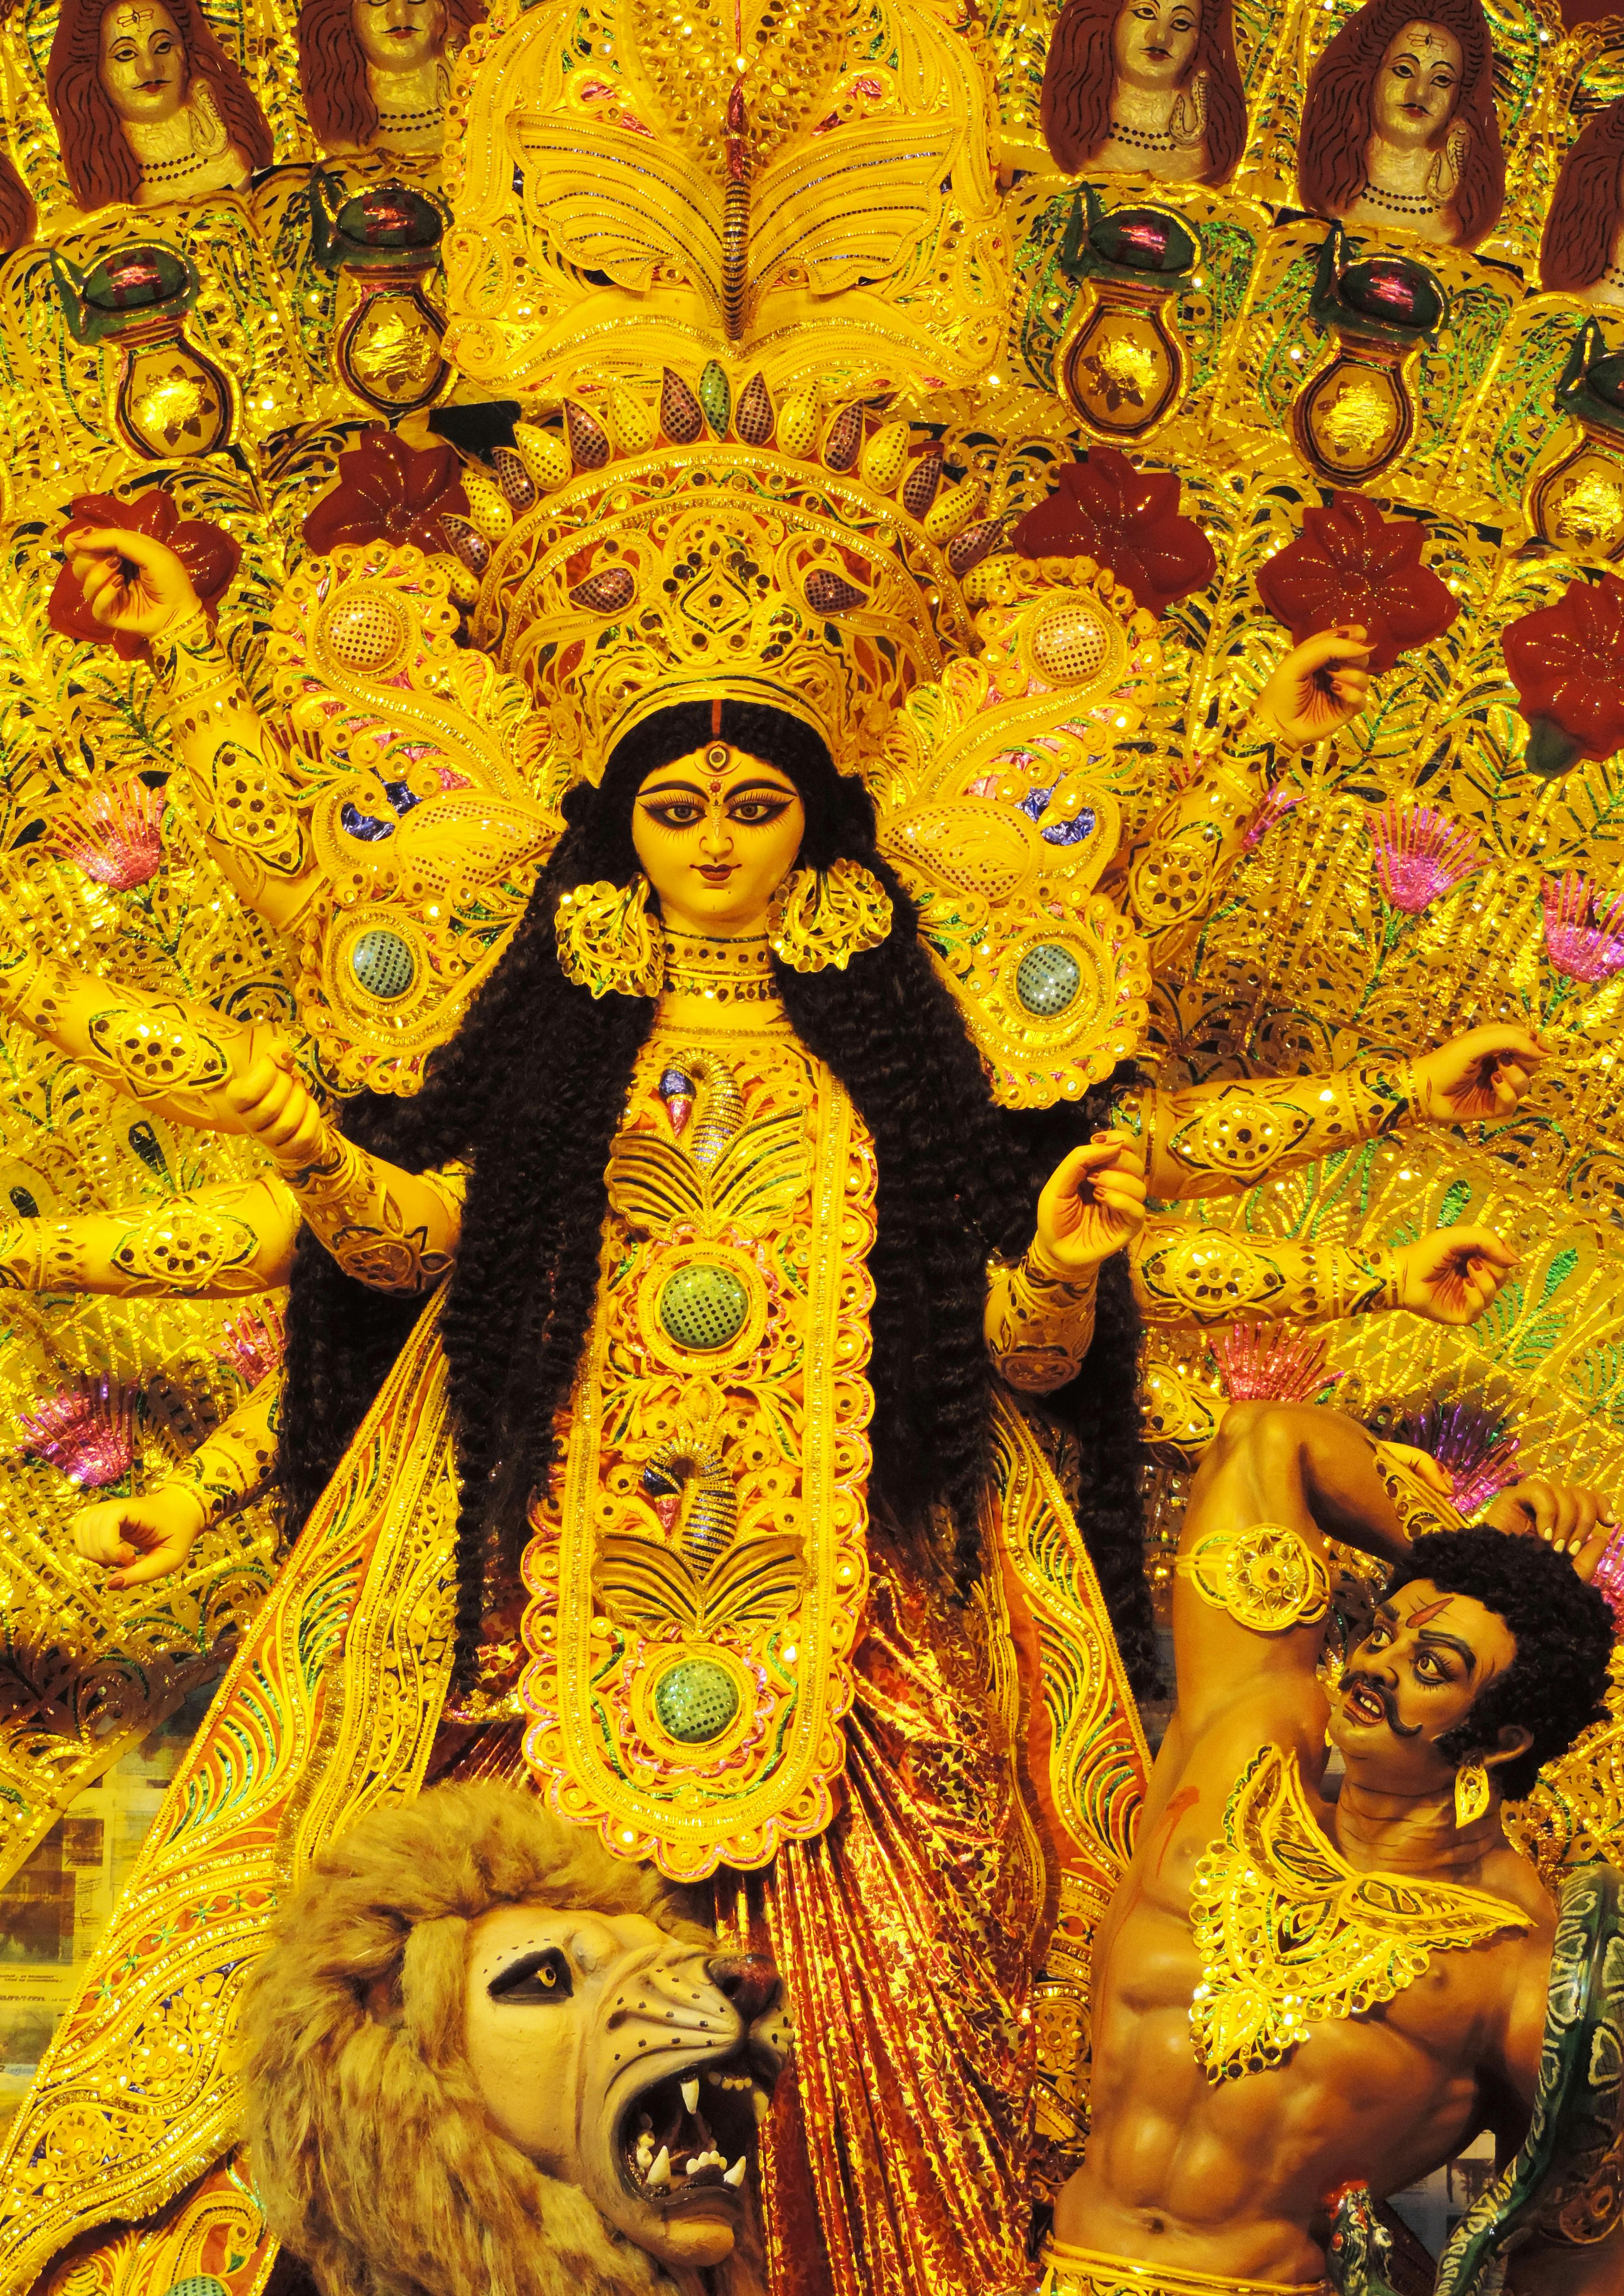 Weapons of Maa Durga - Story Behind The 10 Weapons of Maa Durga